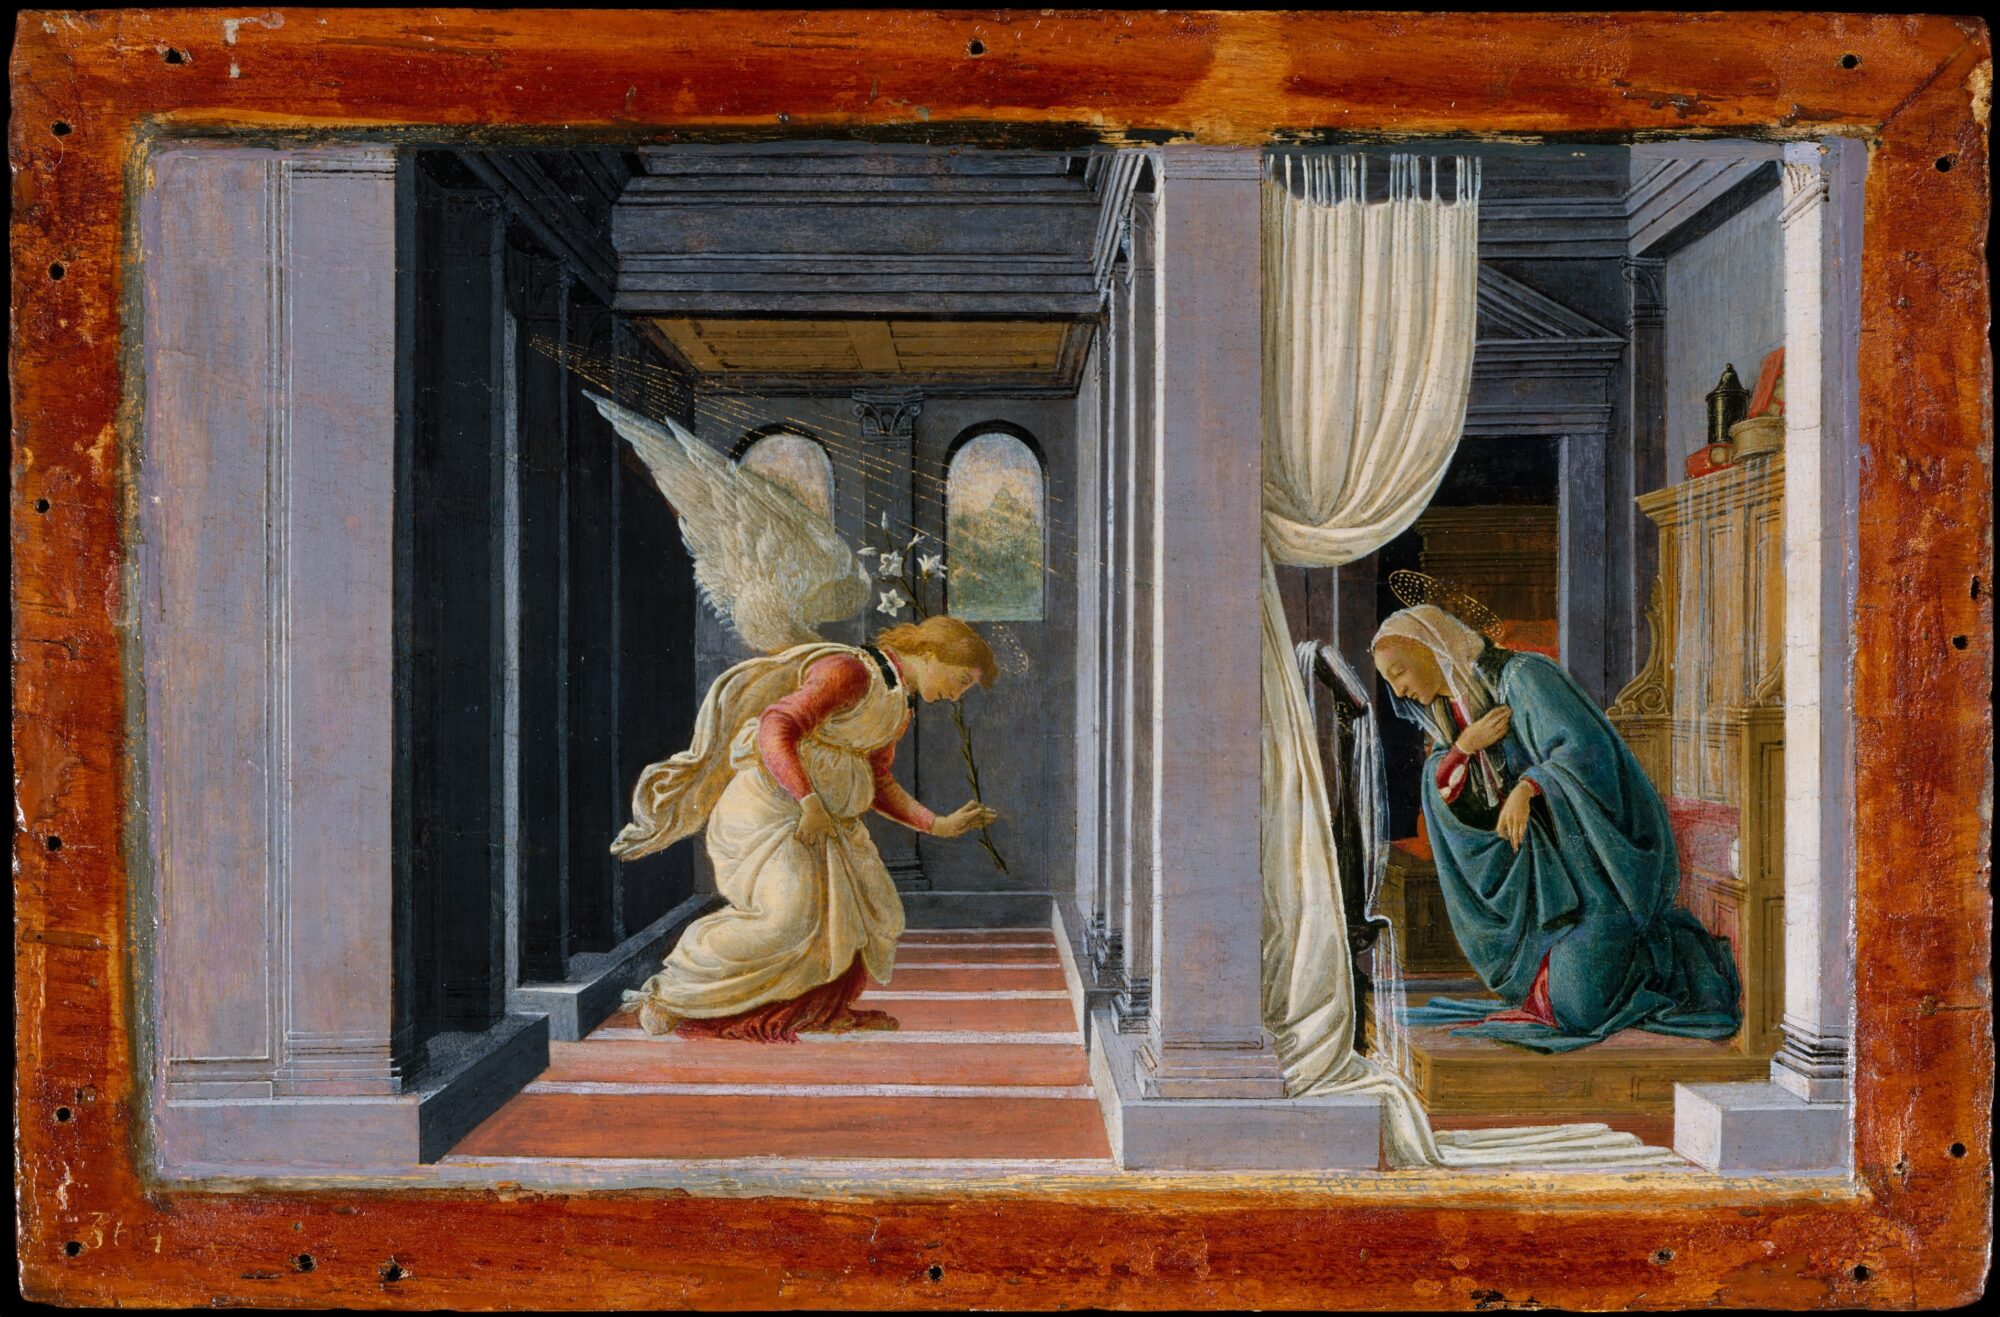 “The Annunciation” (1485-1492), a 19.1 x 31.4 cm tempera and gold on wood painting by Botticelli (1444/45–1510), located in the Metropolitan Museum of Art, New York. In traditional portrayals of the Annunciation, Mary is represented as meditating on Sacred Scripture, as she is here.